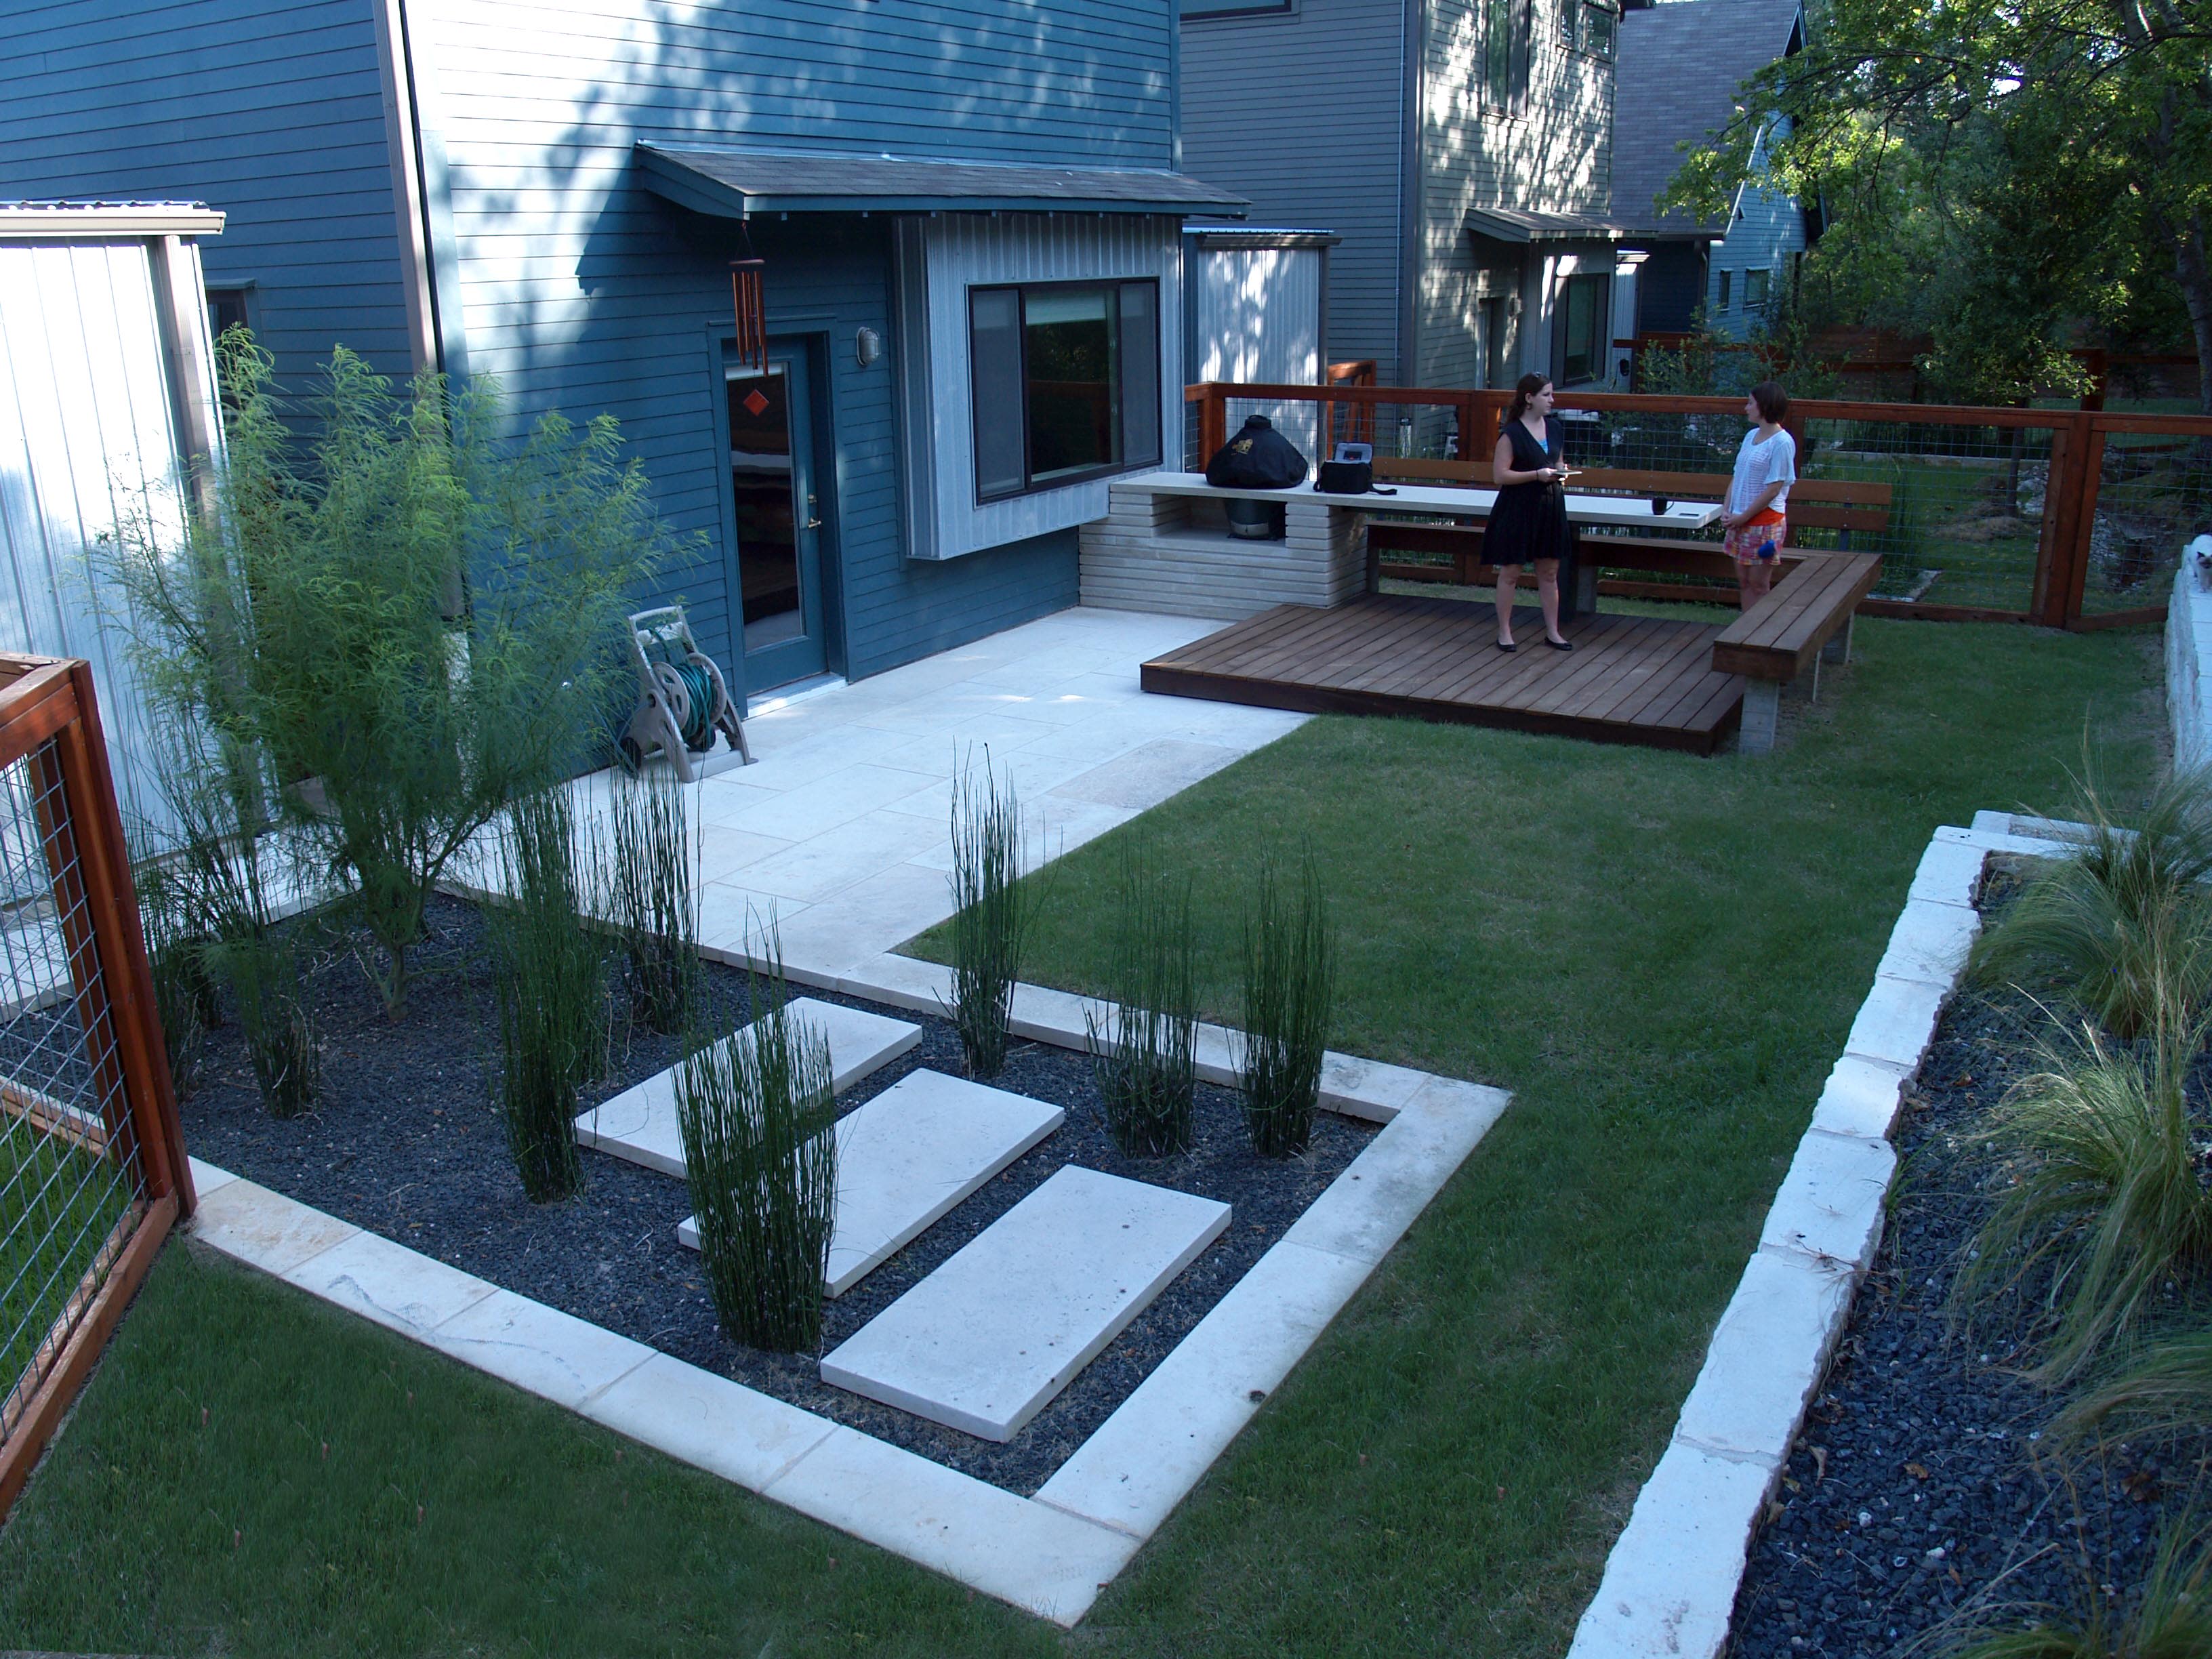 Do Landscape Design Small Spaces Only, Landscape Design For Small Spaces